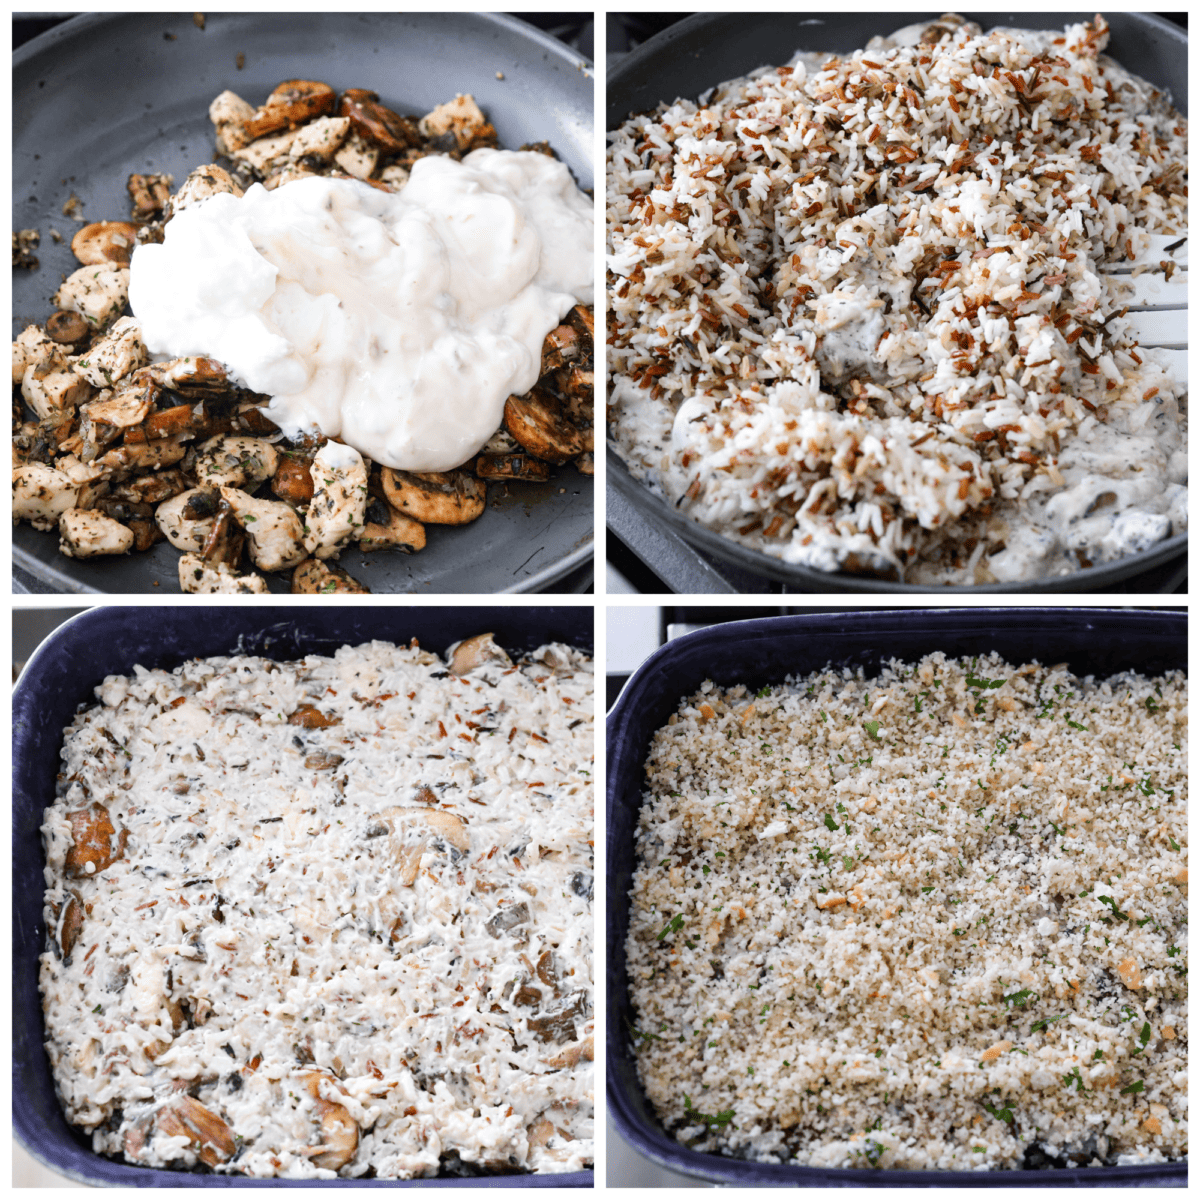 4-photo collage of the wild rice being mixed with a creamy sauce and topped with breadcrumbs.